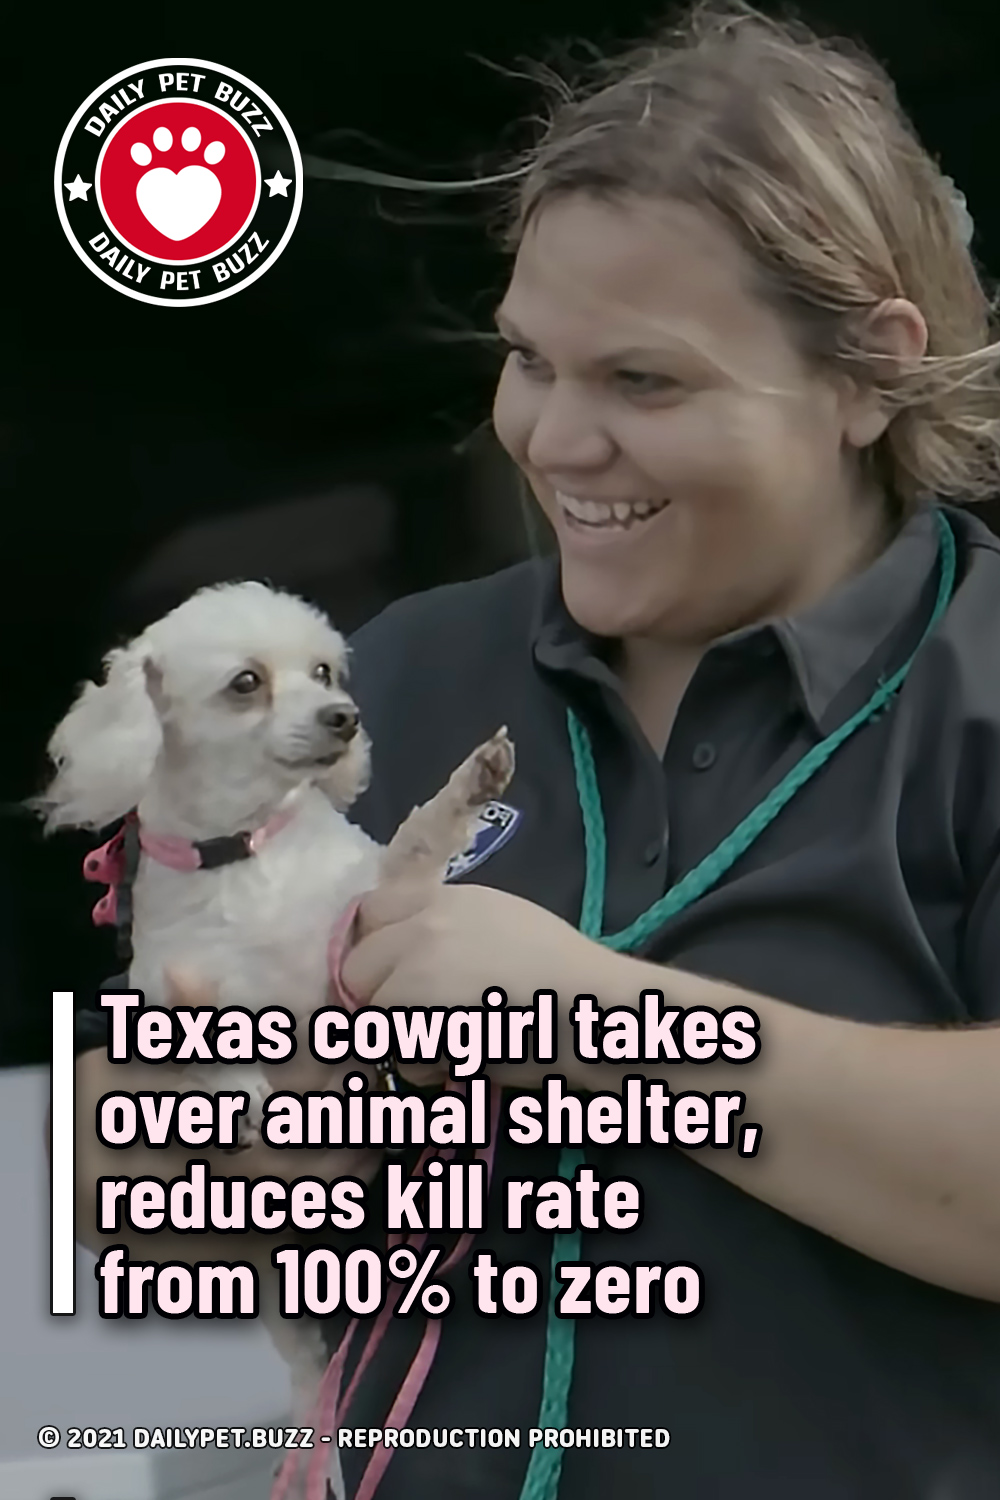 Texas cowgirl takes over animal shelter, reduces kill rate from 100% to zero